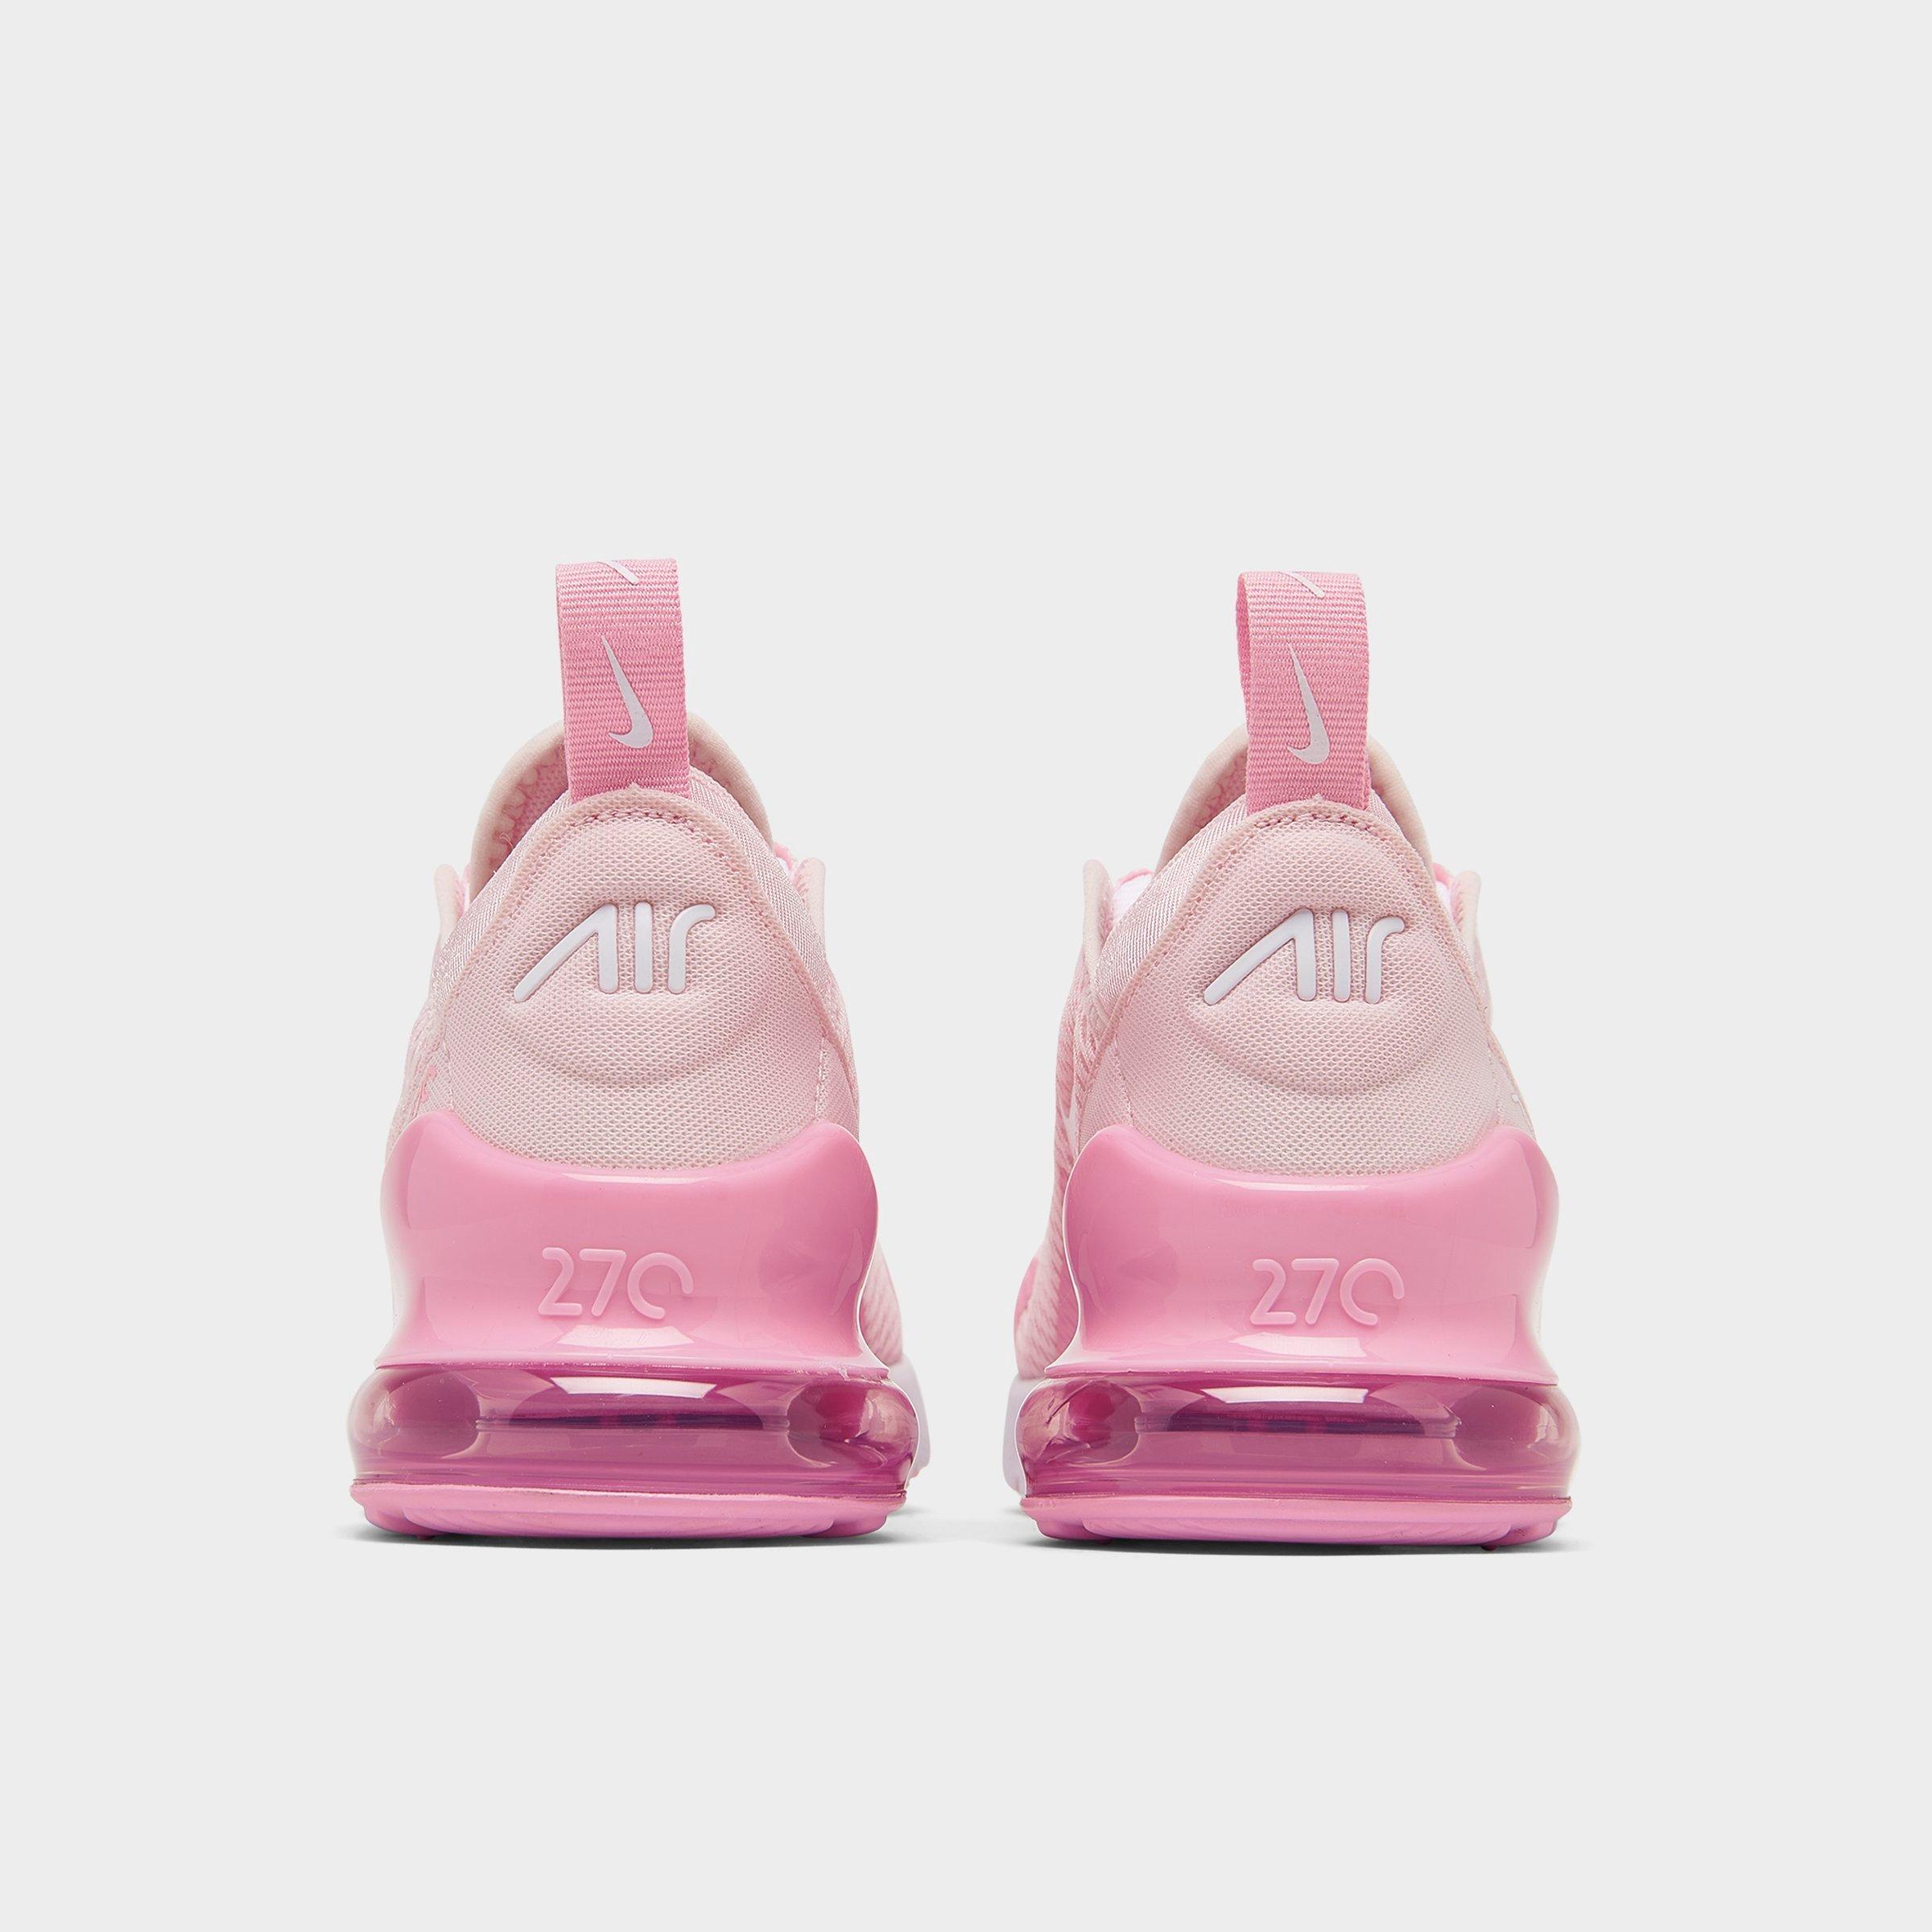 air max for little girls